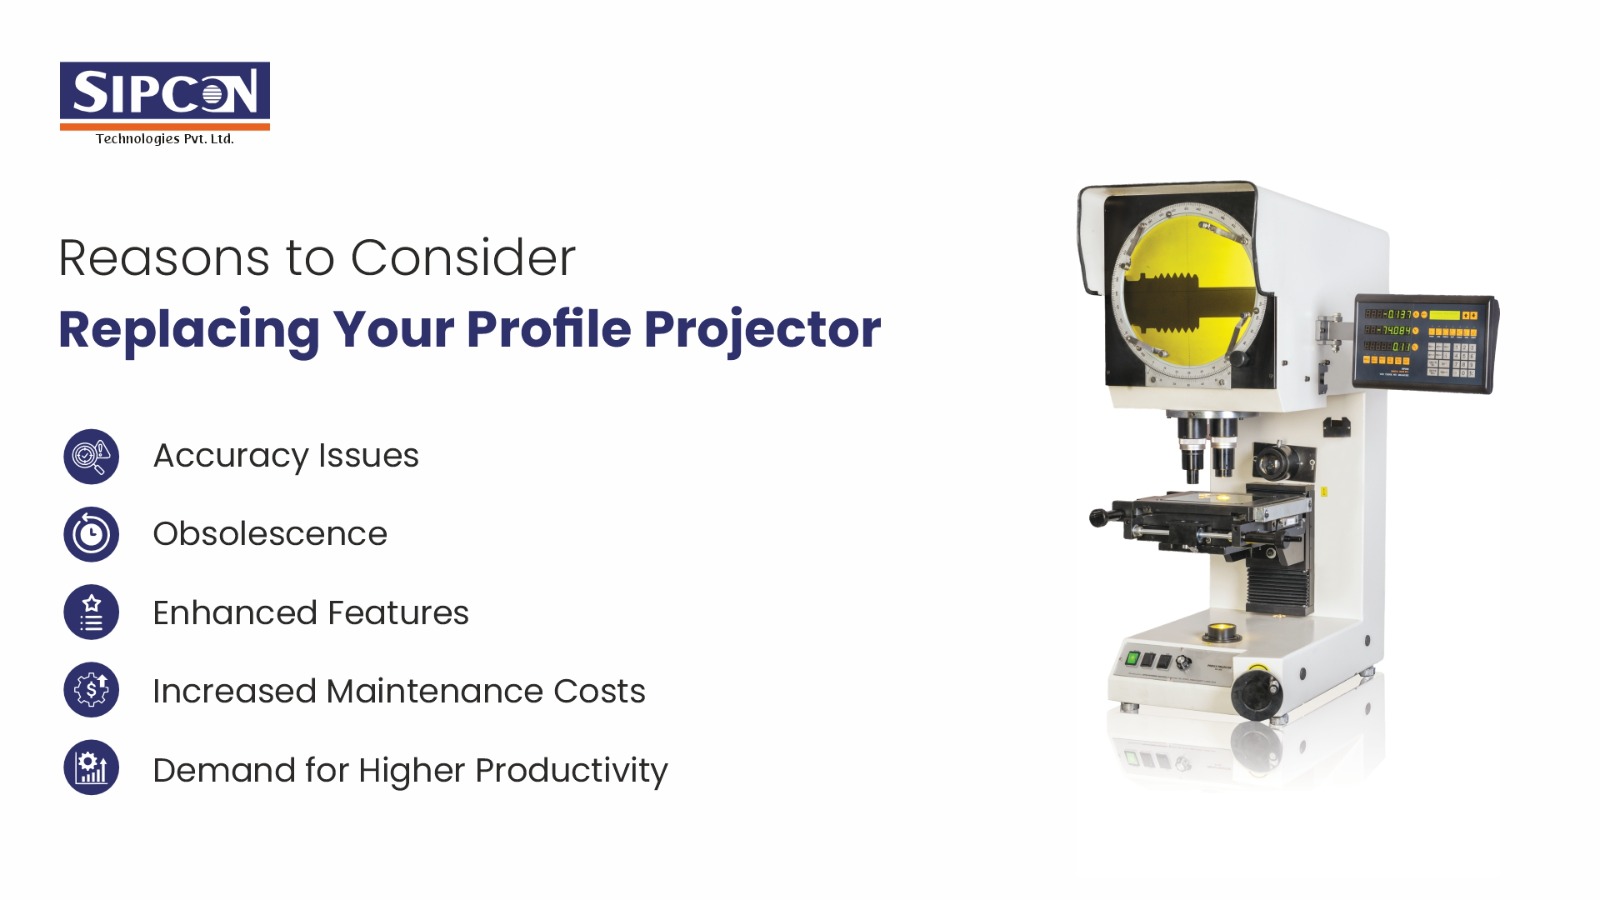 Reasons to Consider Replacing Your Profile Projector